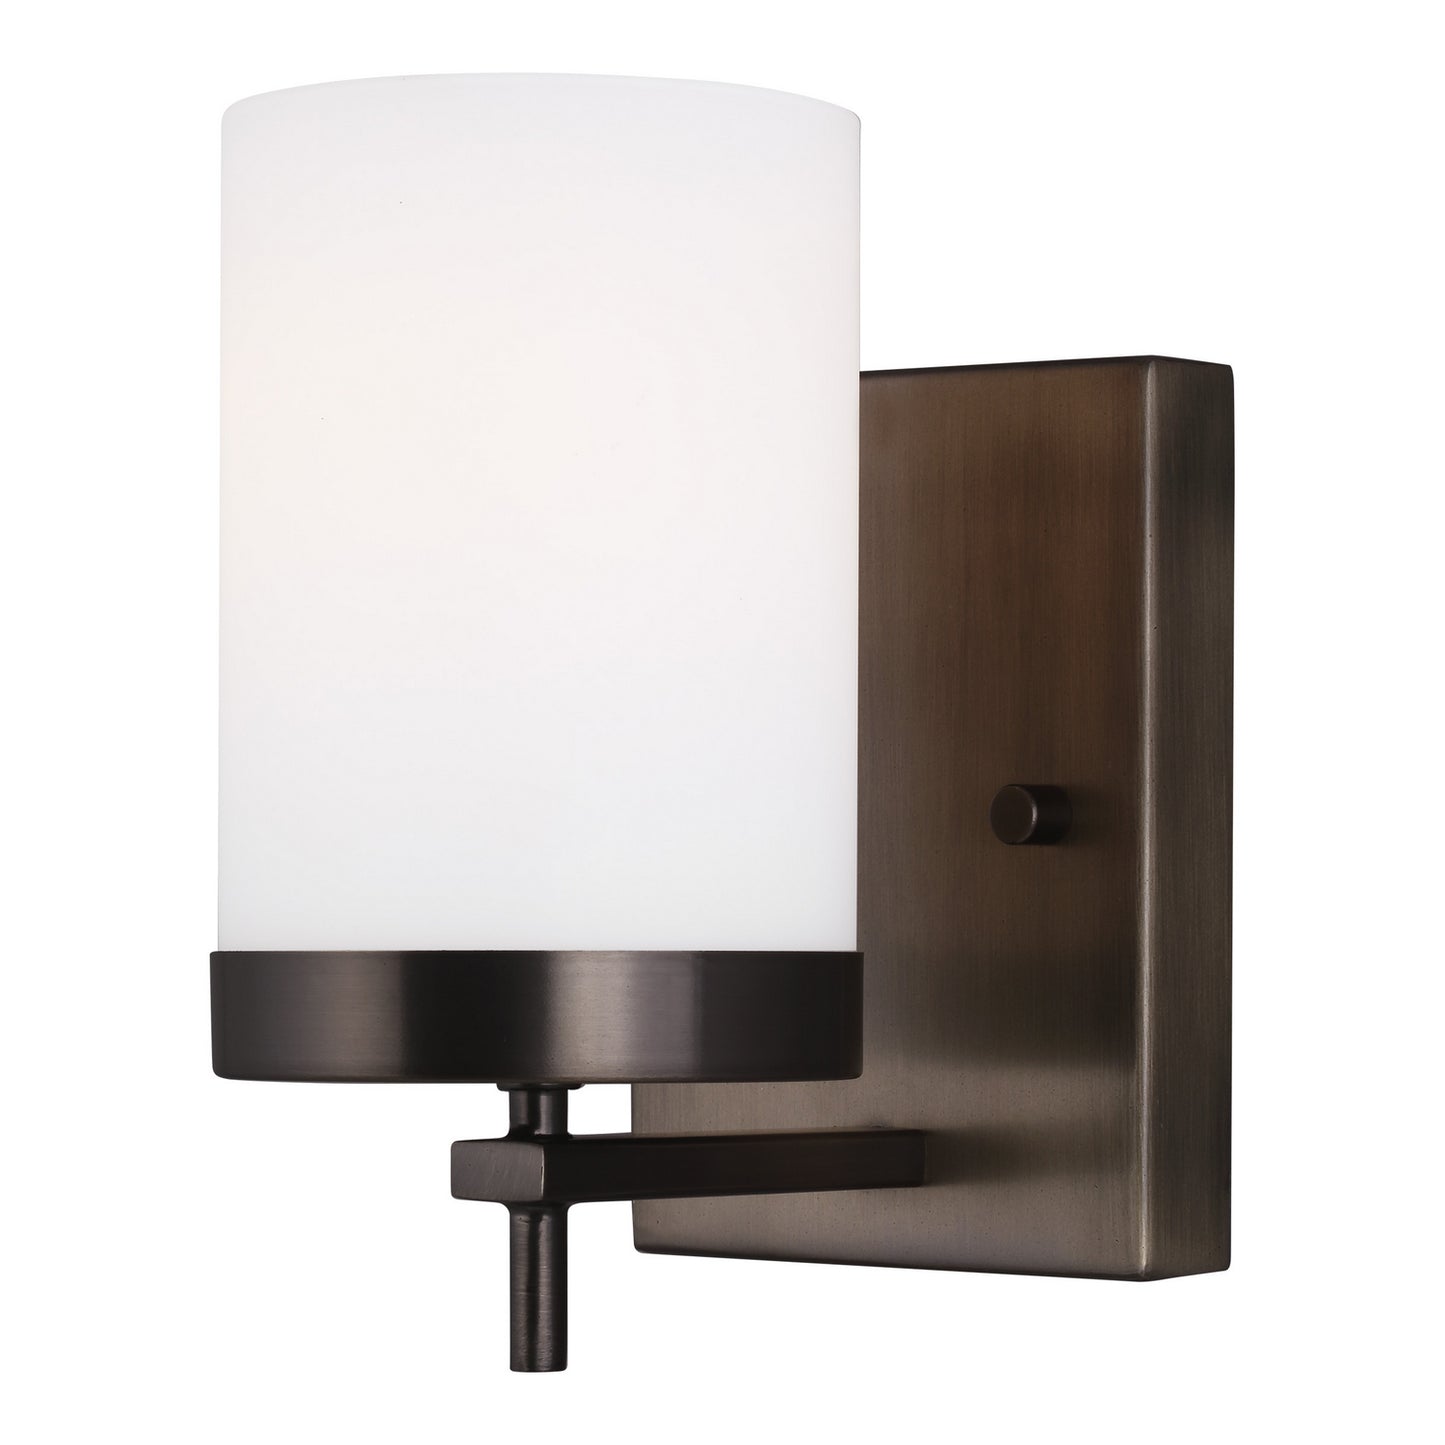 Visual Comfort Studio - 4190301-778 - One Light Wall / Bath Sconce - Zire - Brushed Oil Rubbed Bronze